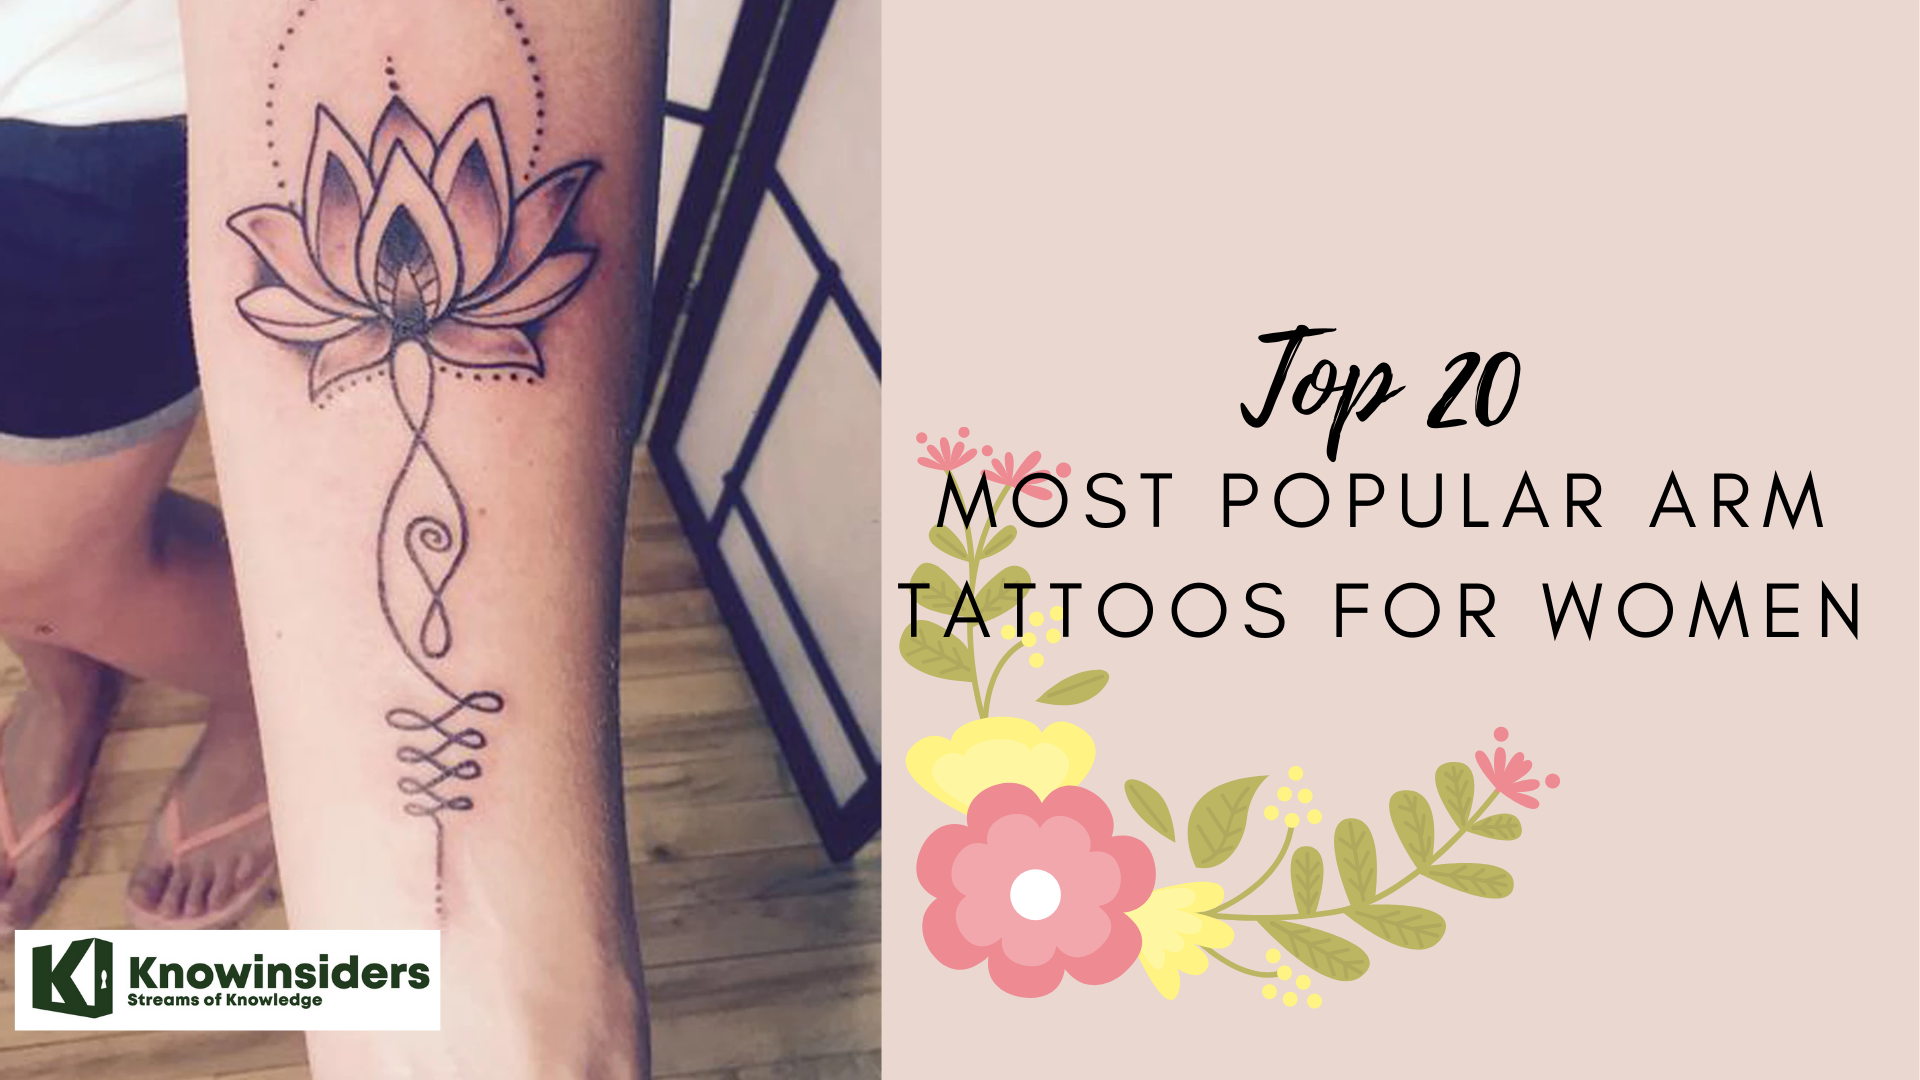 Top 20 most popular arm tattoos for women 